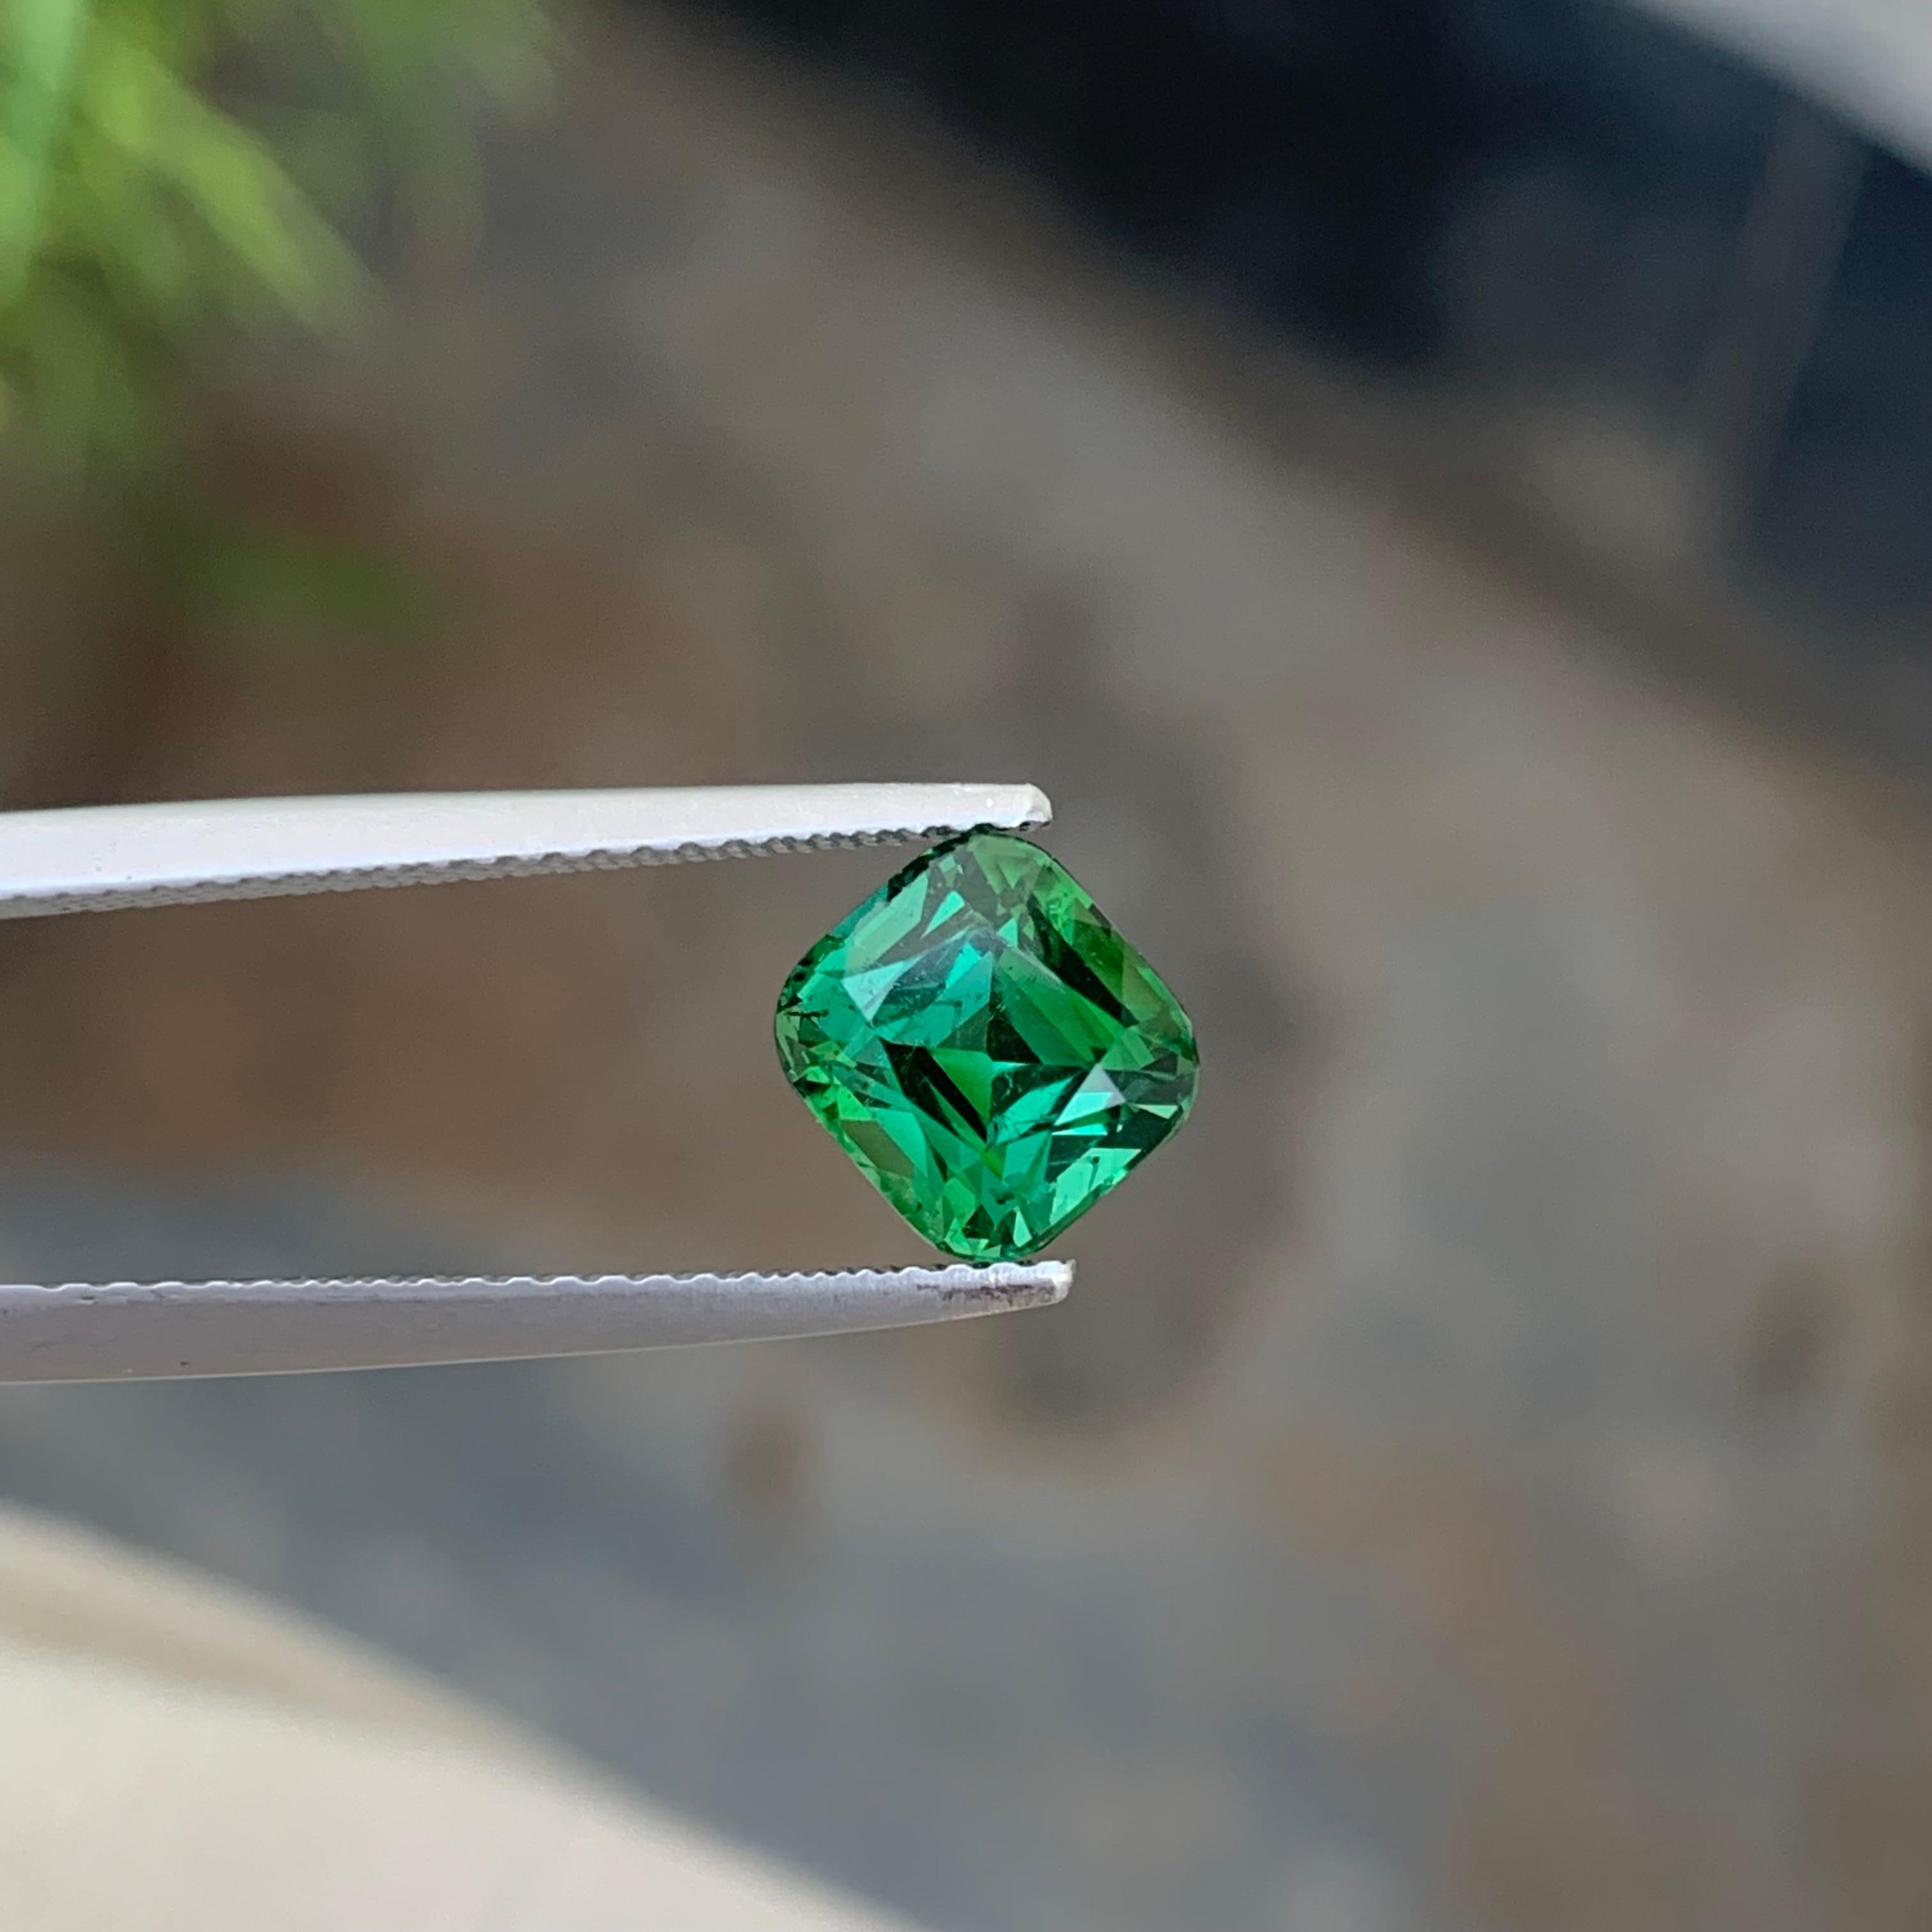 Gemstone Type : Tourmaline
Weight : 1.85 Carats
Dimensions : 7.2x6.6x5.5 Mm
Origin : Kunar Afghanistan
Clarity : SI
Shape: Cushion
Color: Mintgreen
Certificate: On Demand
Basically, mint tourmalines are tourmalines with pastel hues of light green to